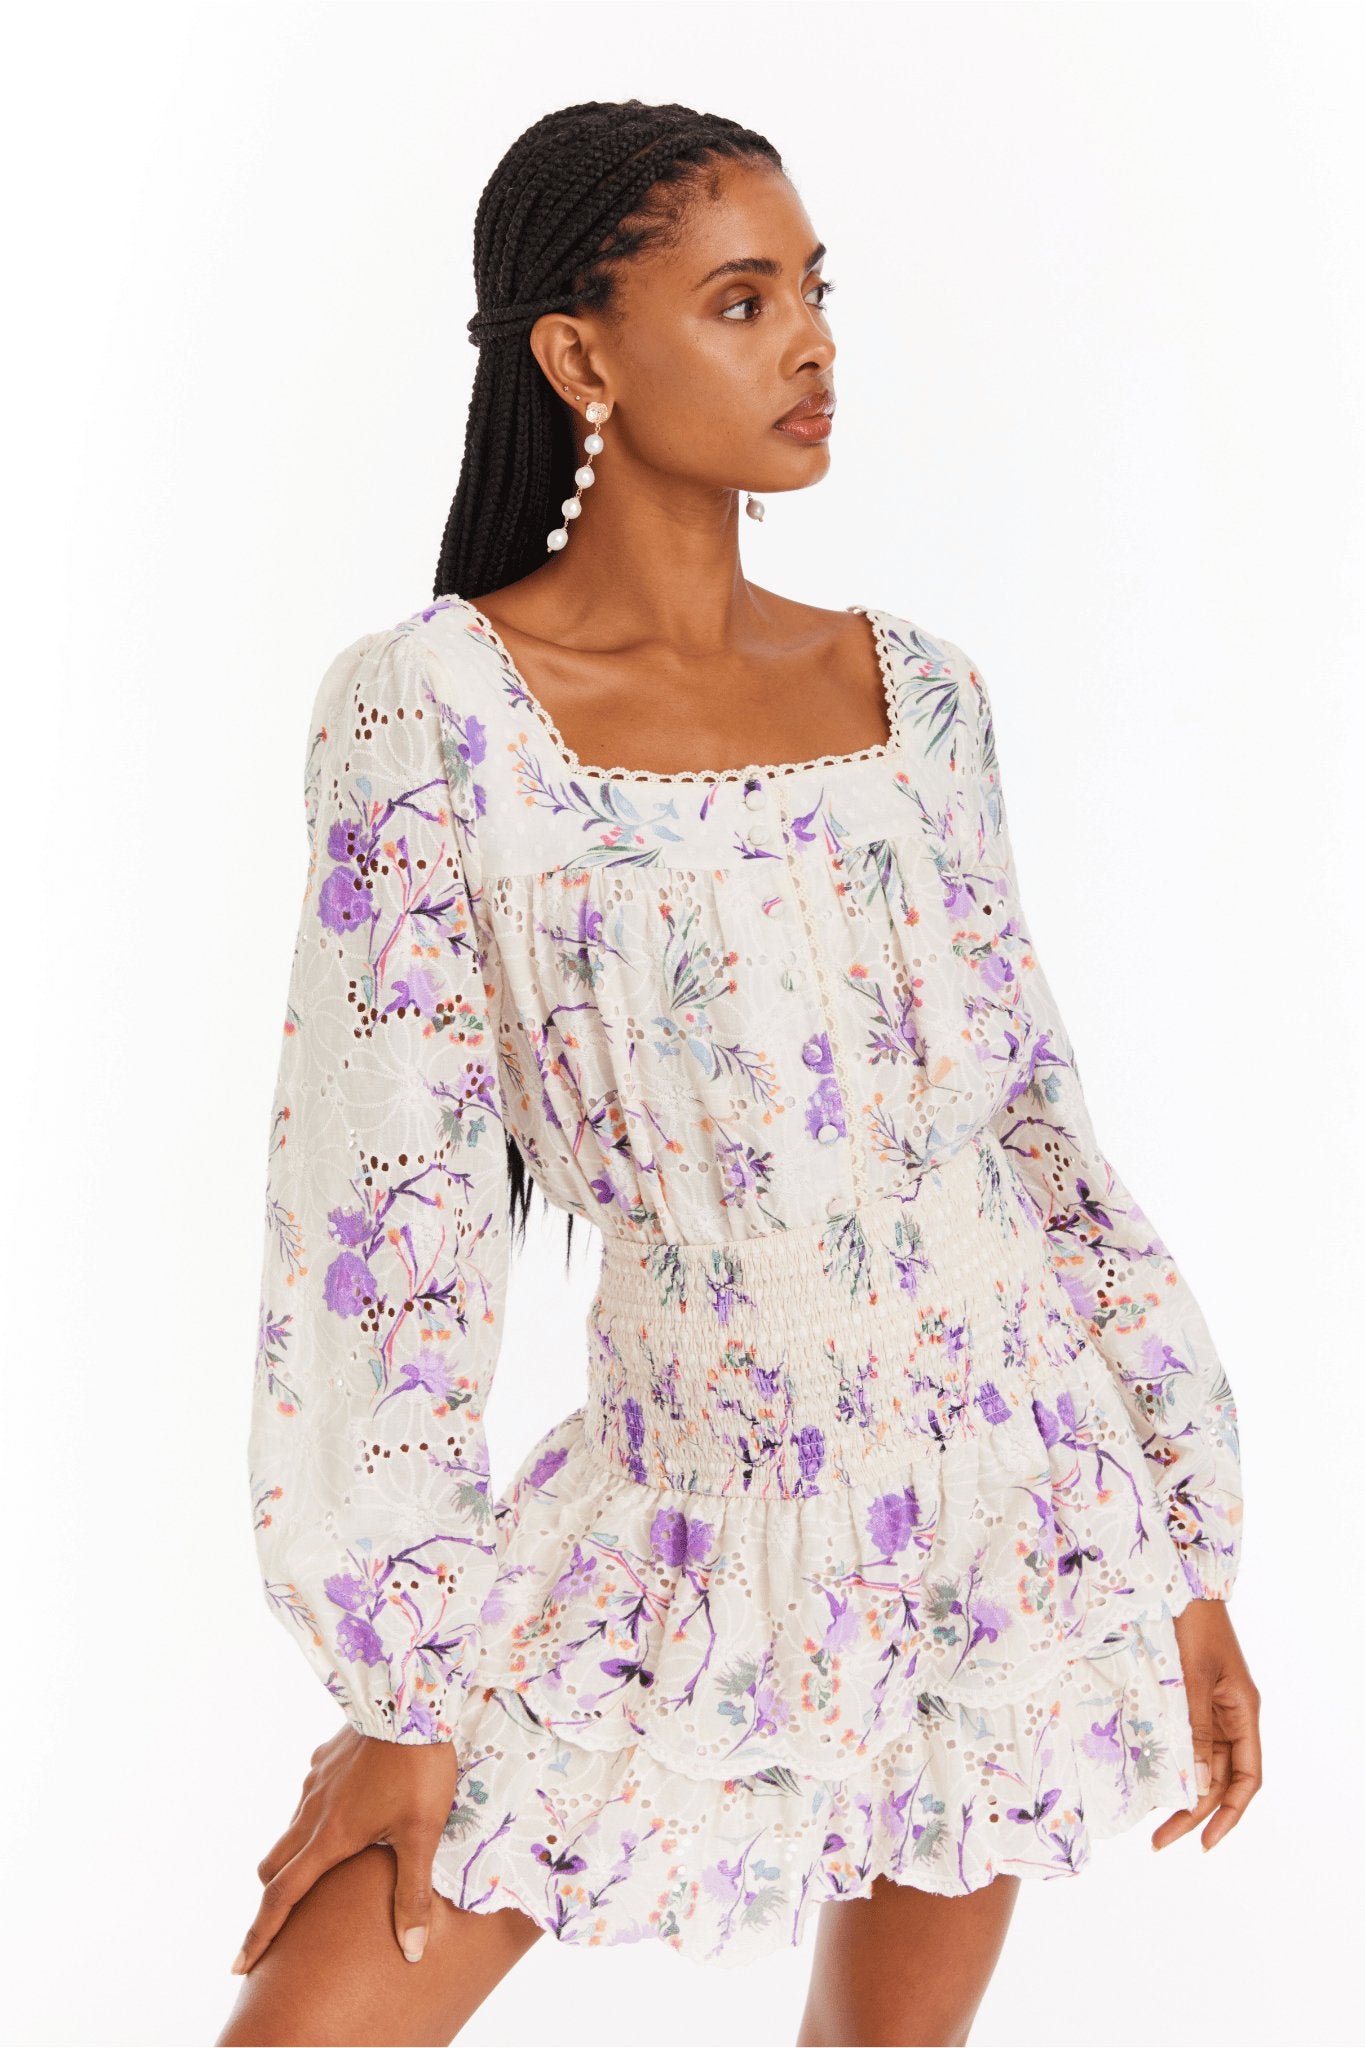 Rylie Top Watercolor Floral - Allison New York - Color Game